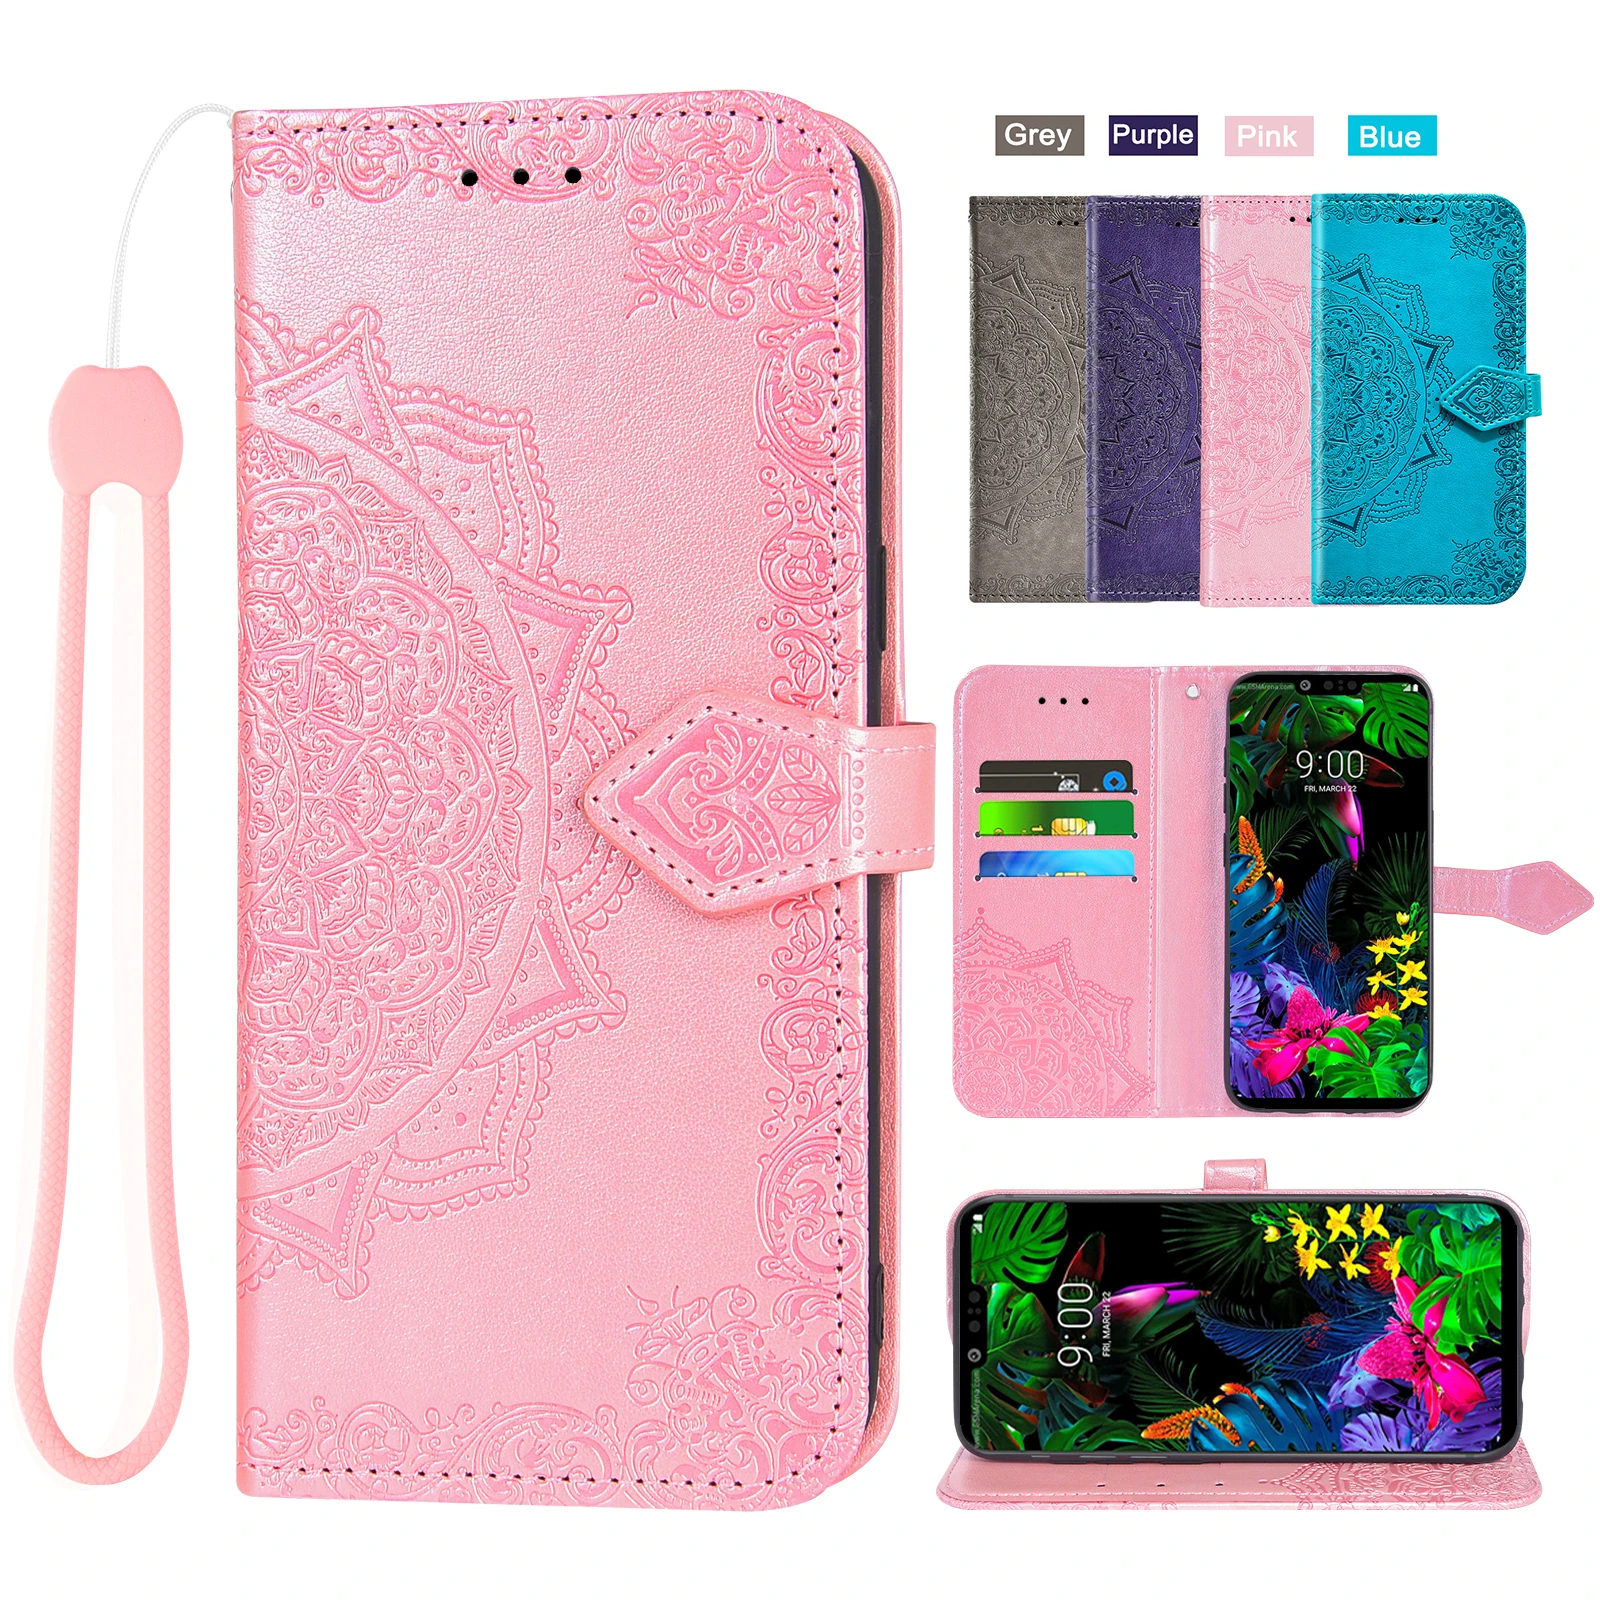 

Flip Cover Leather Wallet Phone Case For Samsung Galaxy G360 Core Prime Xcover 4 4S Xcover 5 Xcover Pro Note Edge N9150 Woman